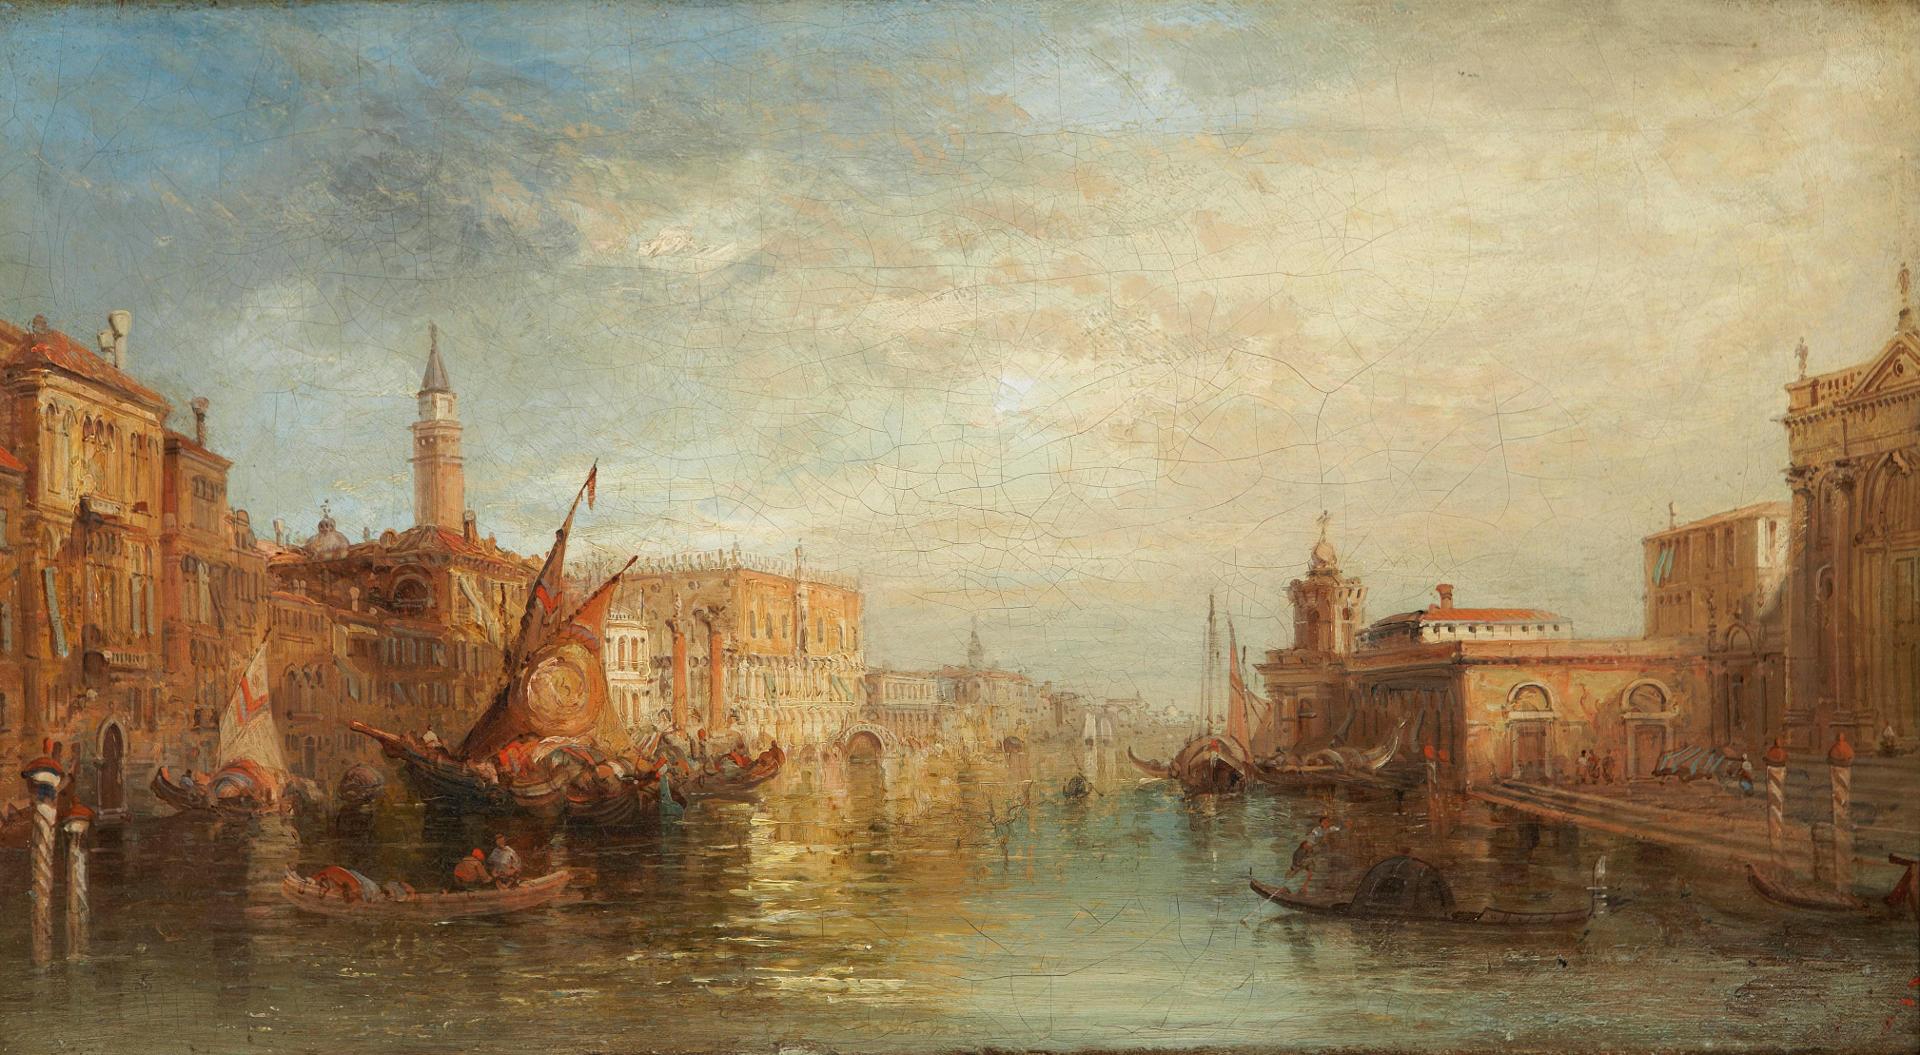 Alfred Pollentine (1836-1890) - The Grand Canal with the Ducal Palace, Venice